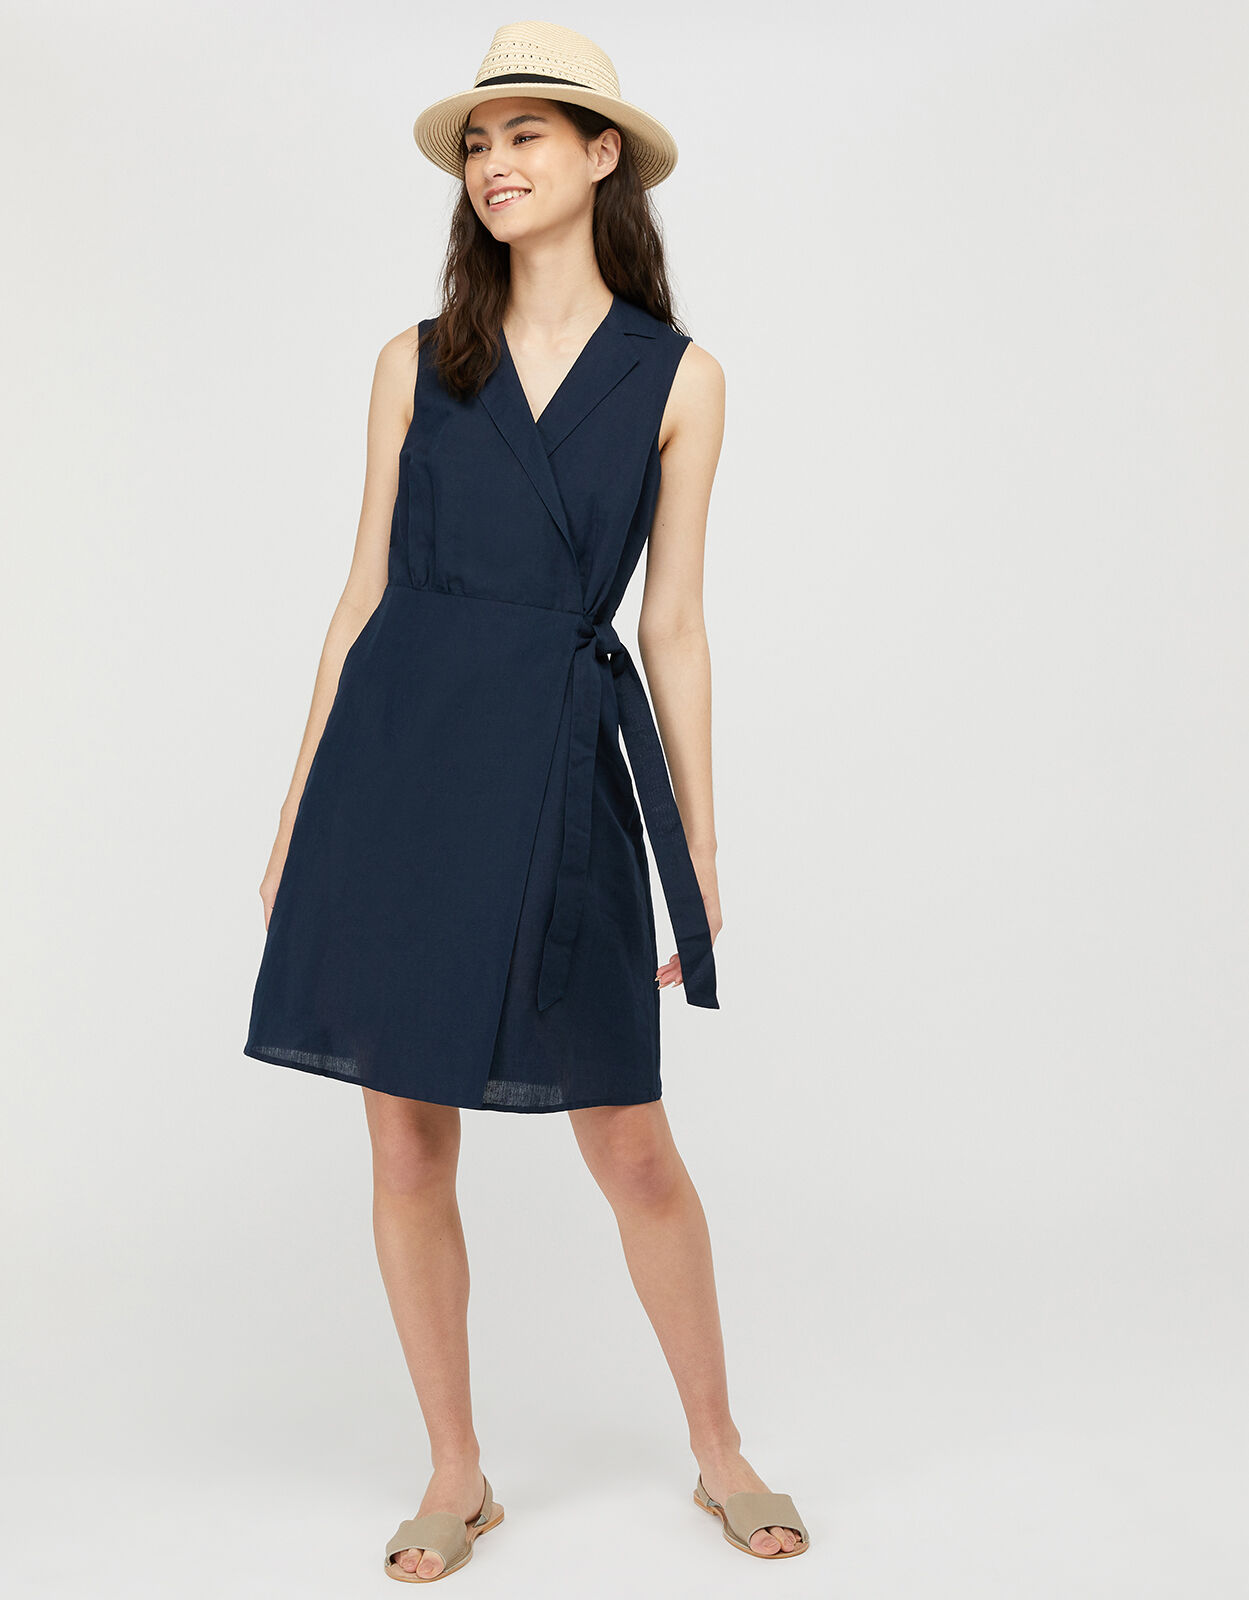 casual day dresses uk